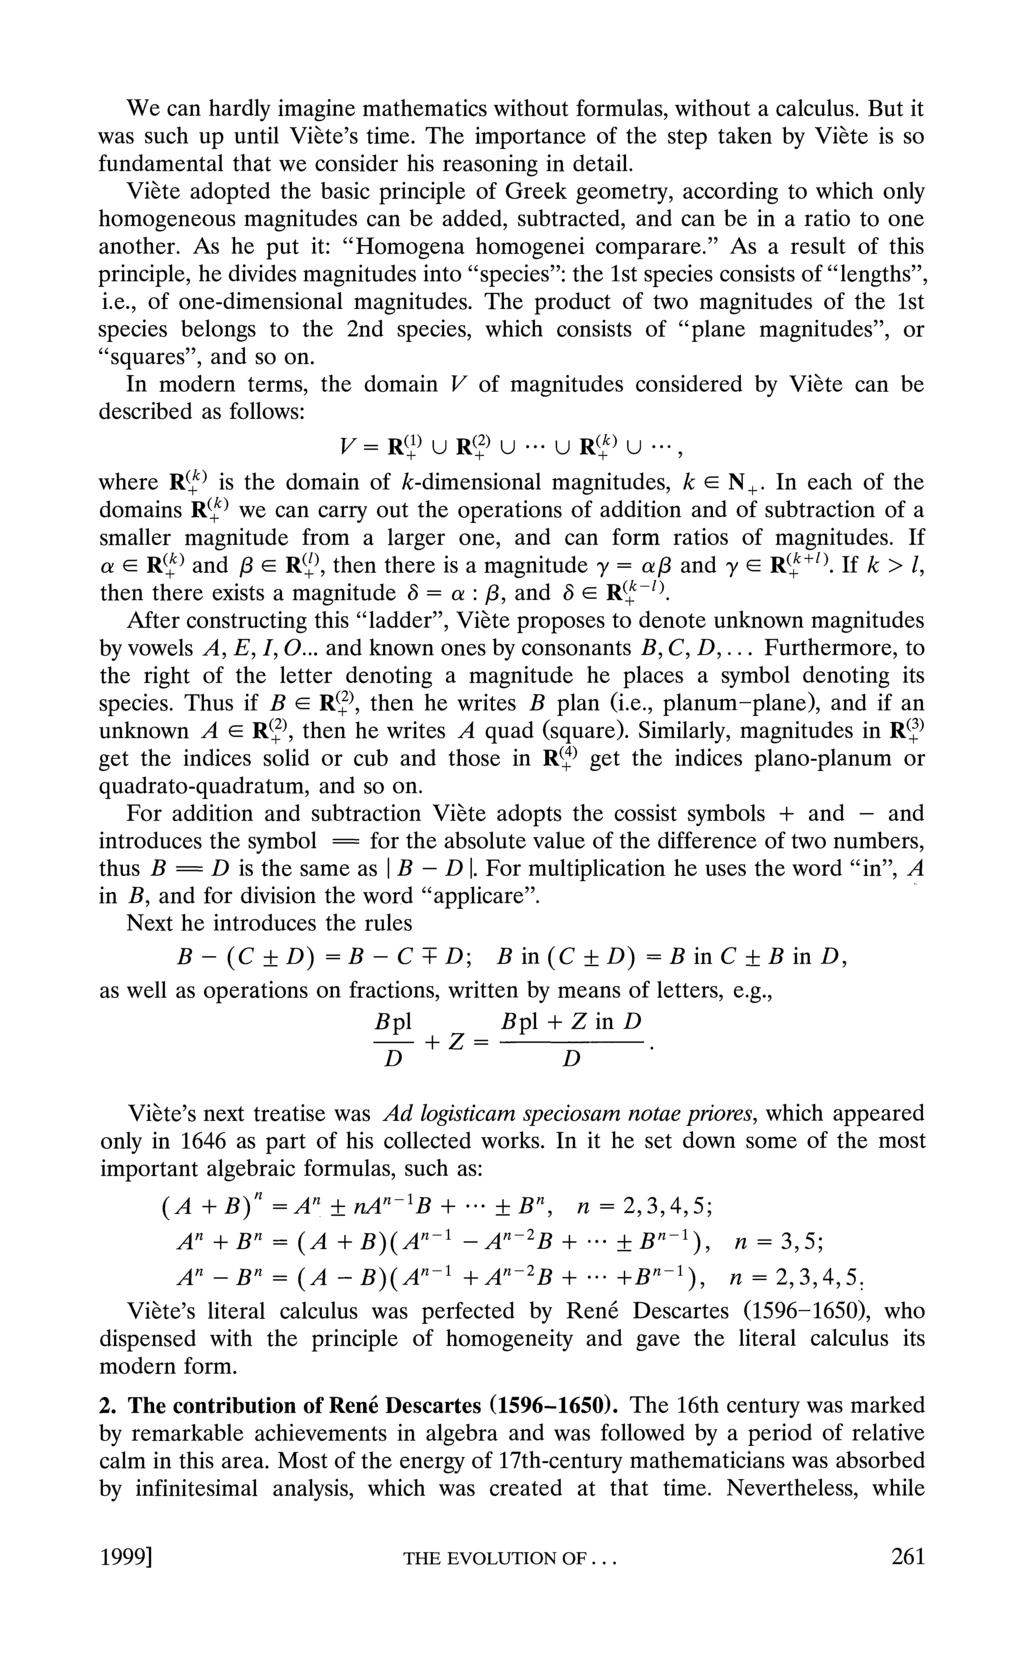 We can hardly imagine mathematics without formulas, without a calculus. But it was such up until Viete's time.